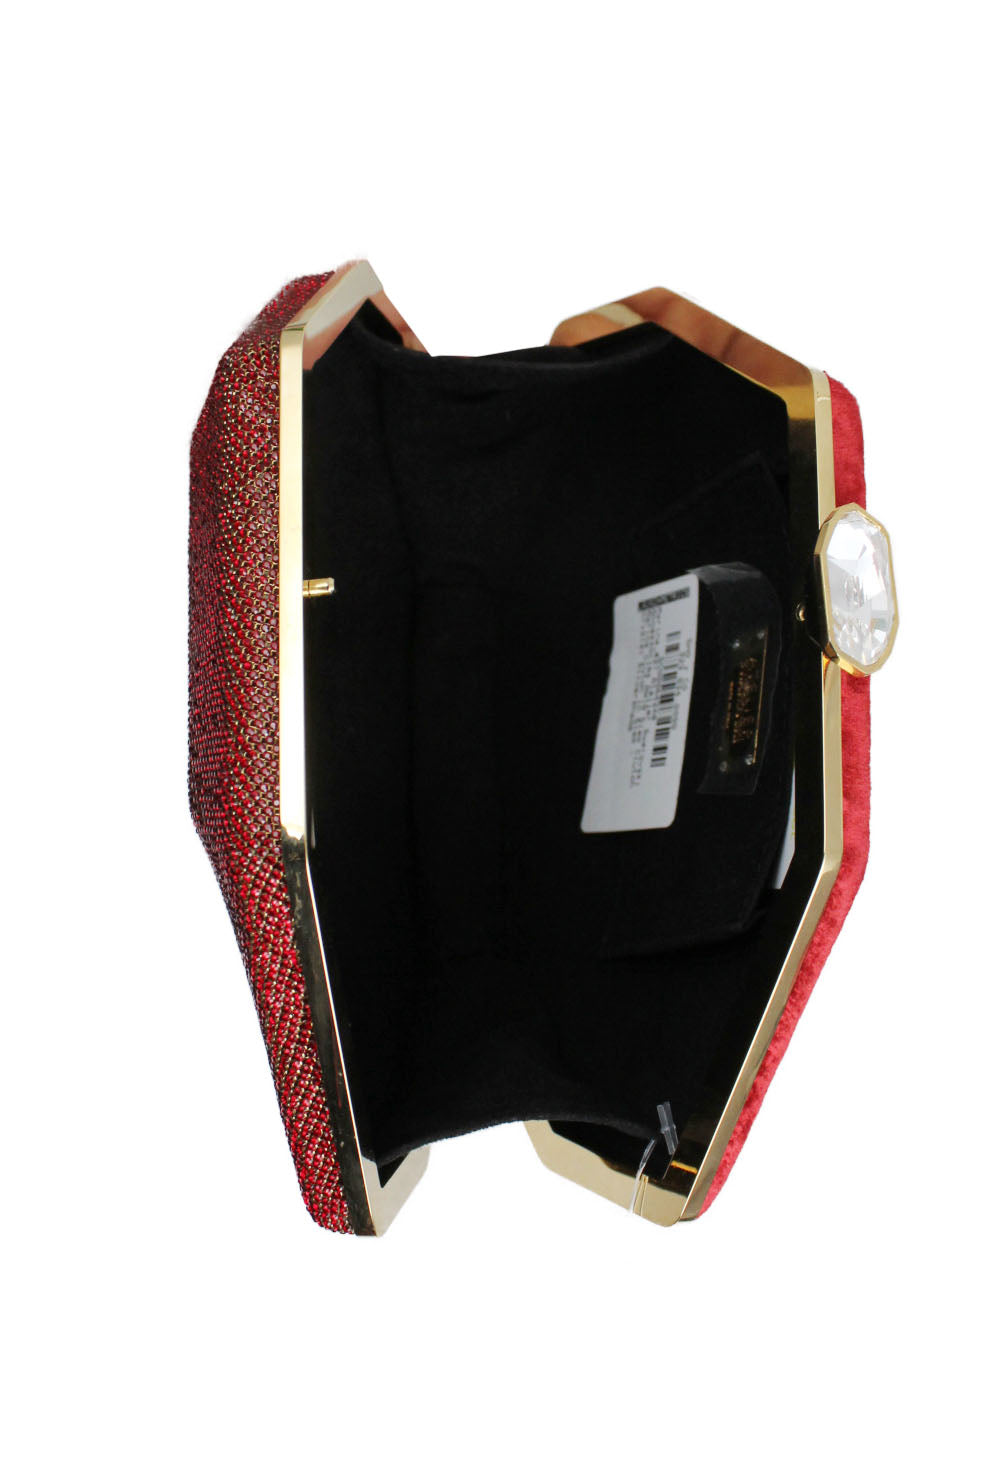 atelier swarvoski aw19 'marina siam clutch. features asymmetrical geometric silhouette with red rhinestones on one side and red velvet on the other. gold metal trim and internal black fabric lining with small pockets. rhinestone on top acts as a closure release.